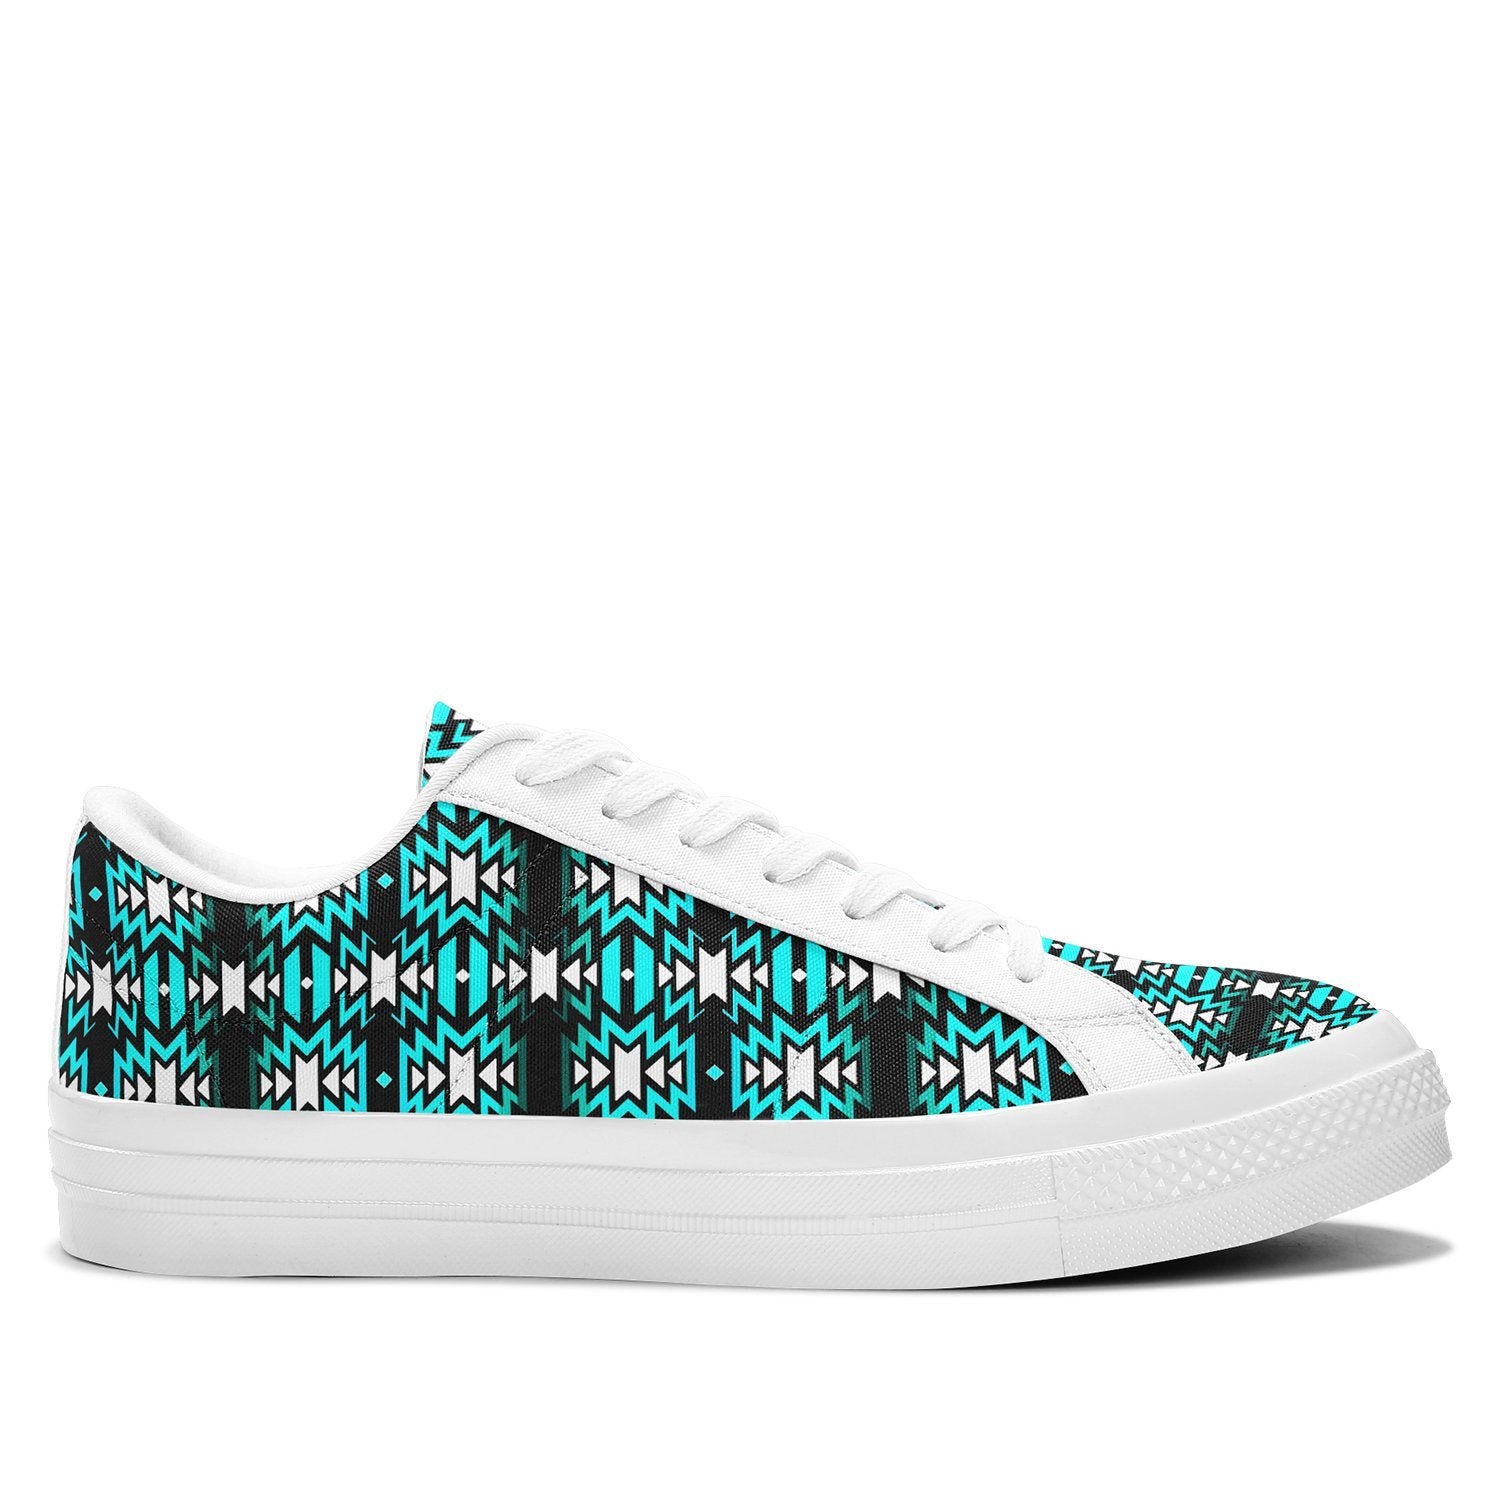 Black Fire Firefly Aapisi Low Top Canvas Shoes White Sole 49 Dzine 